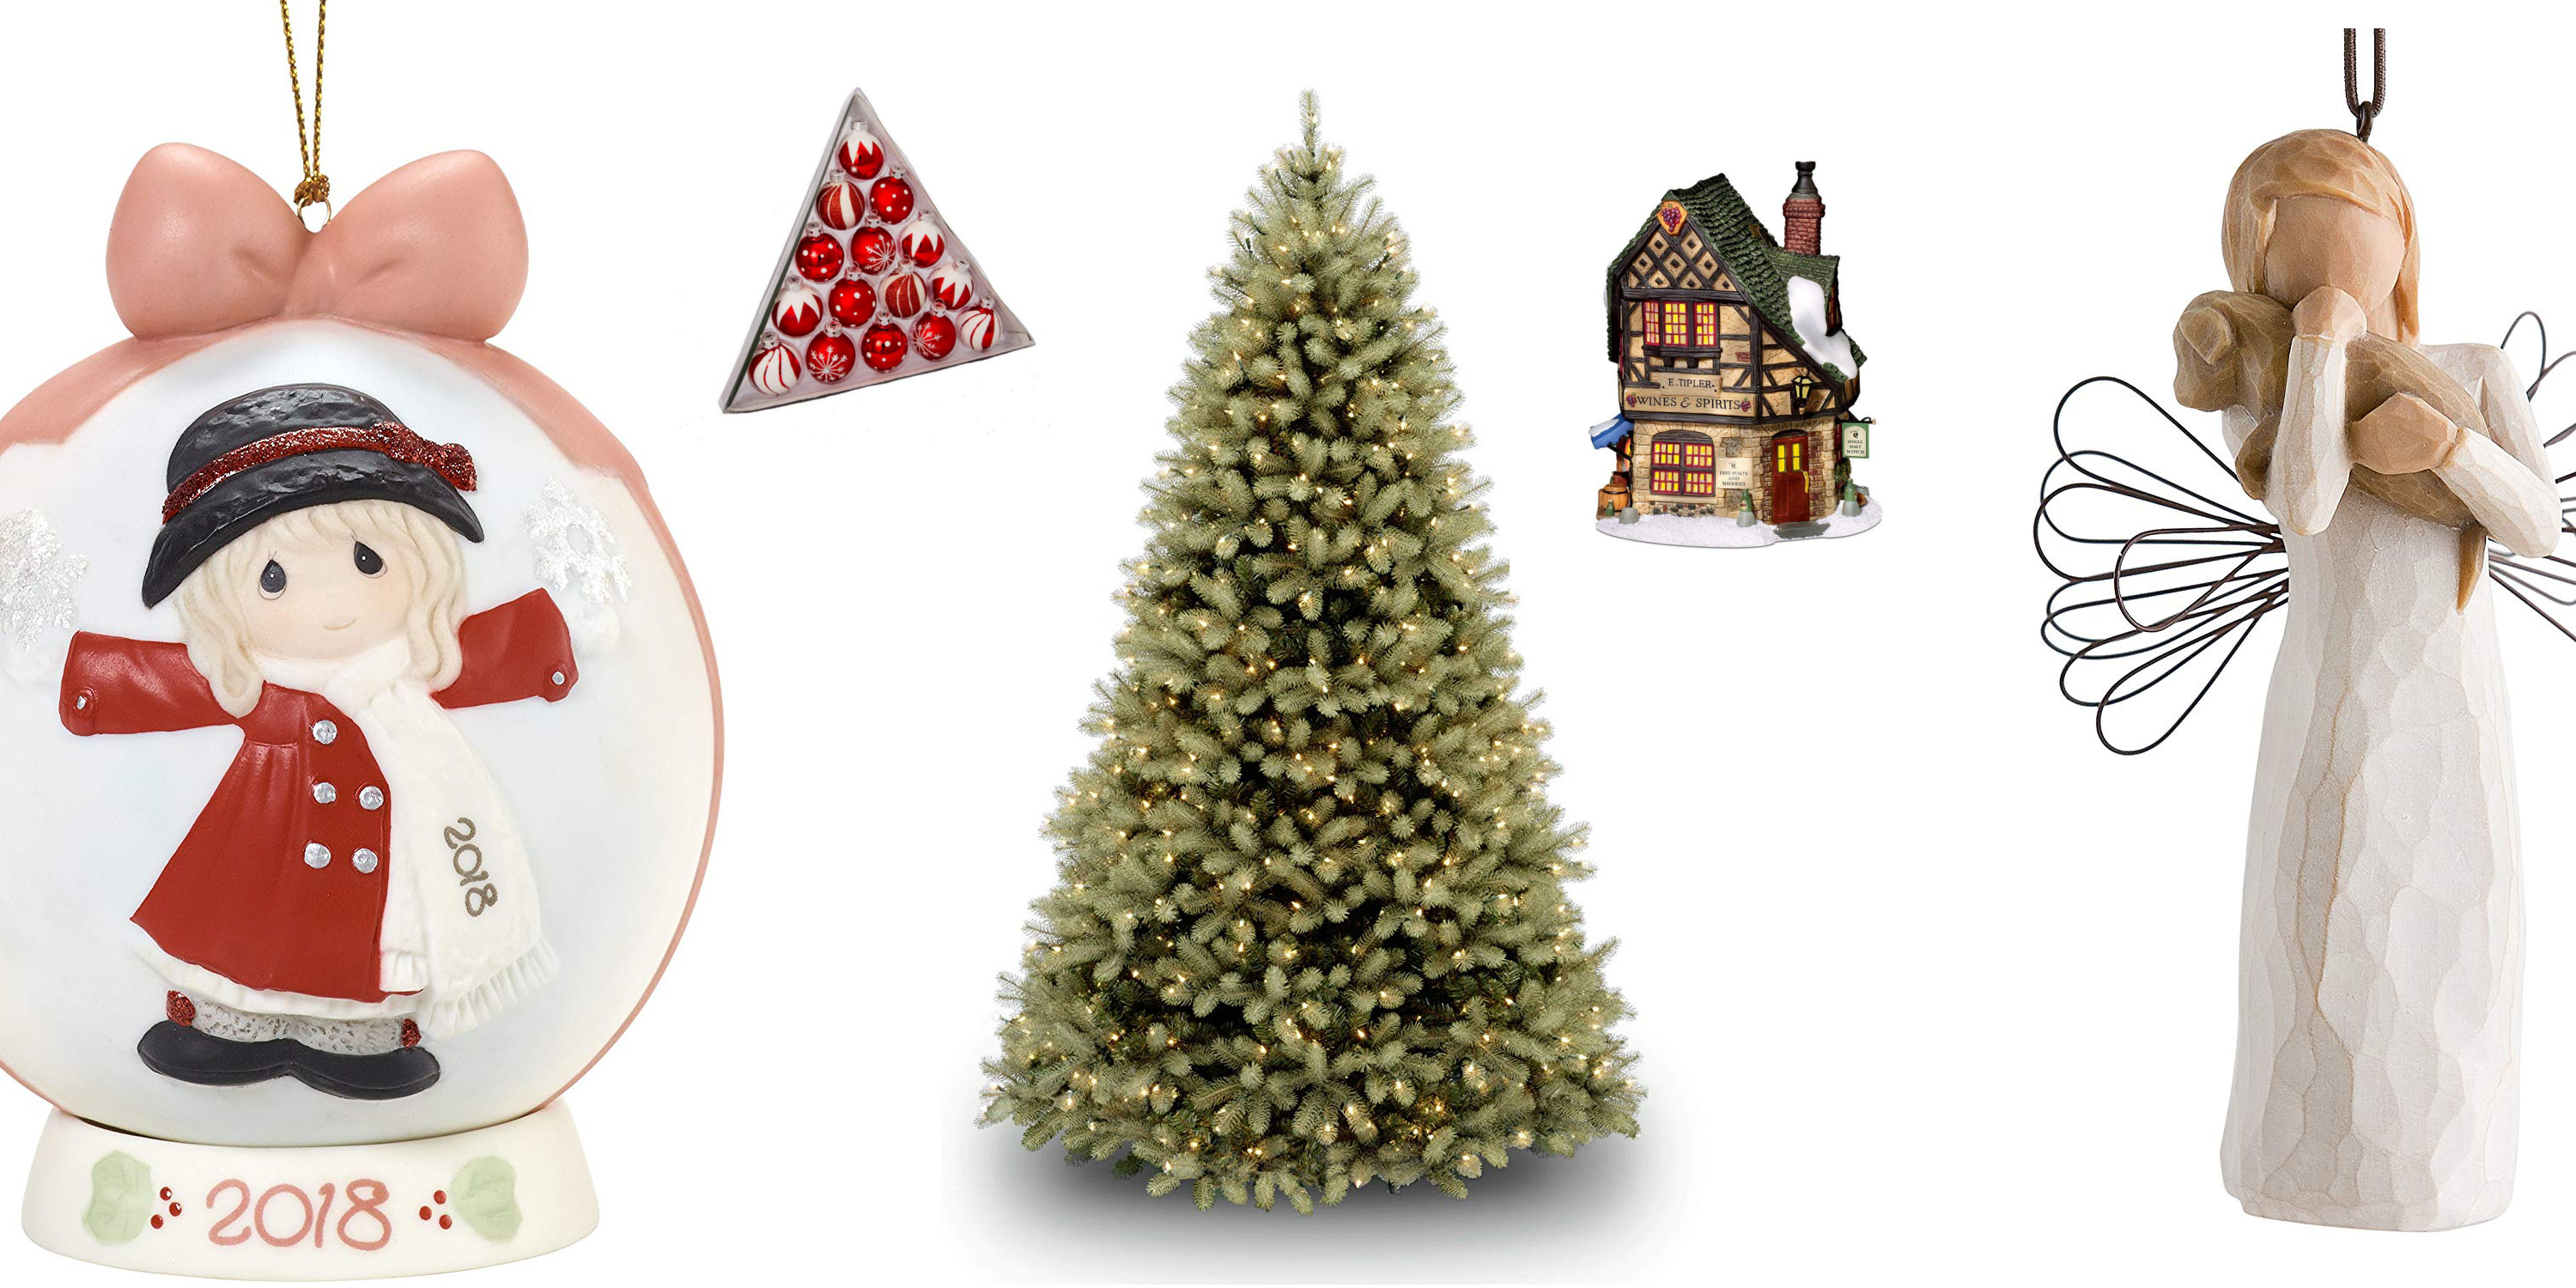 Amazon offers up to 50% off holiday decor from $7 trees, ornaments